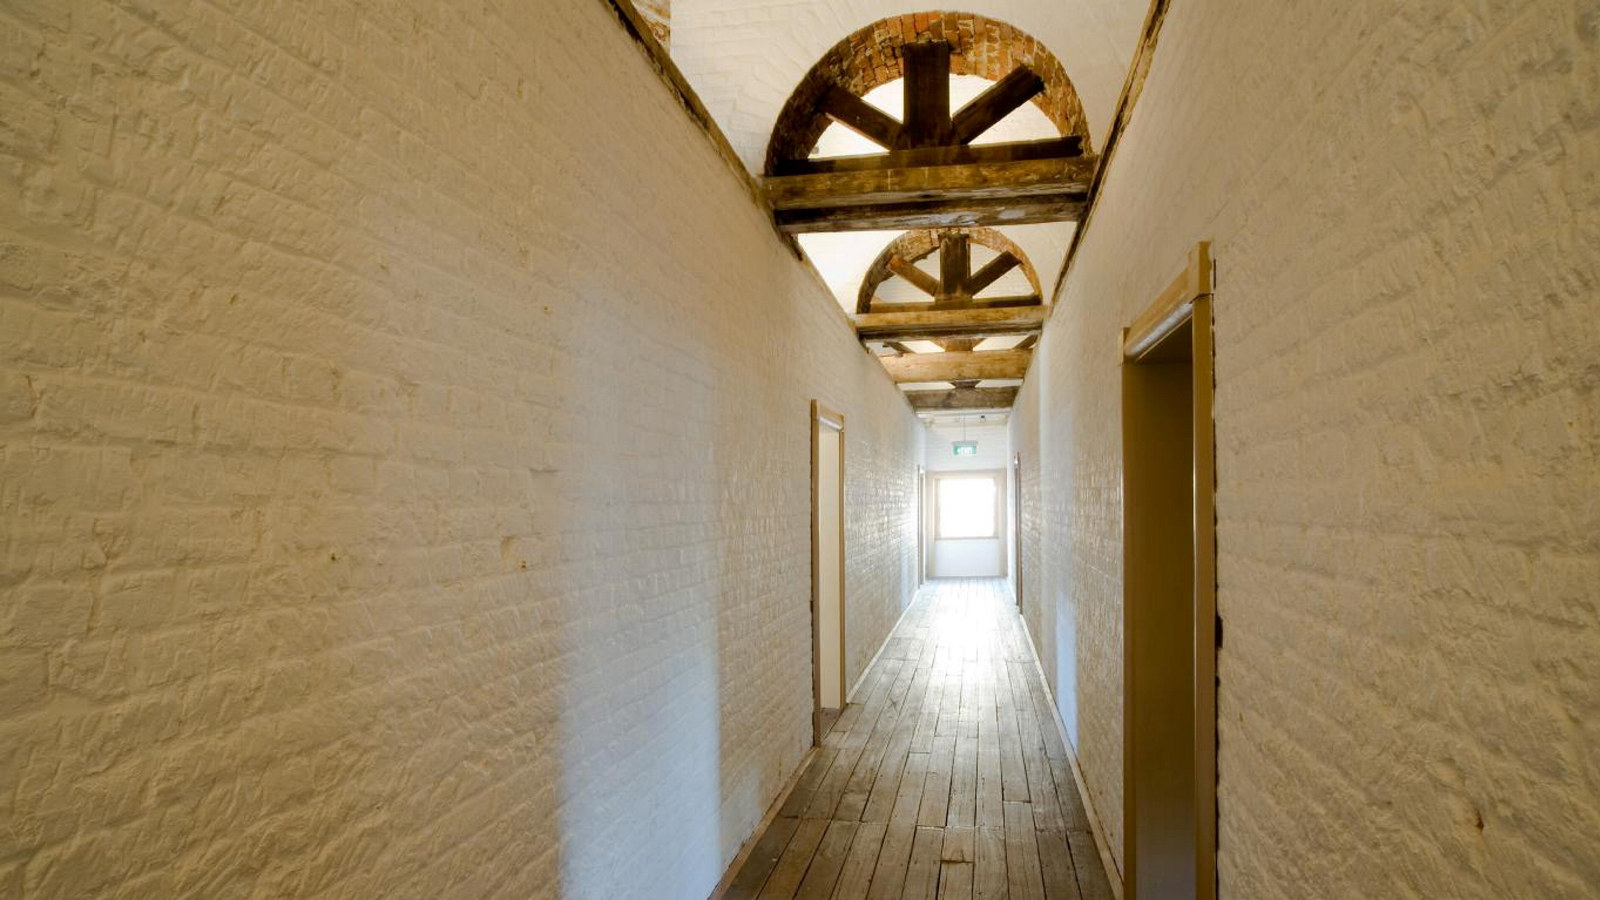 Long corridor with wooden floor, painted brick walls and wooden arches above, leading to backlit window at far end.